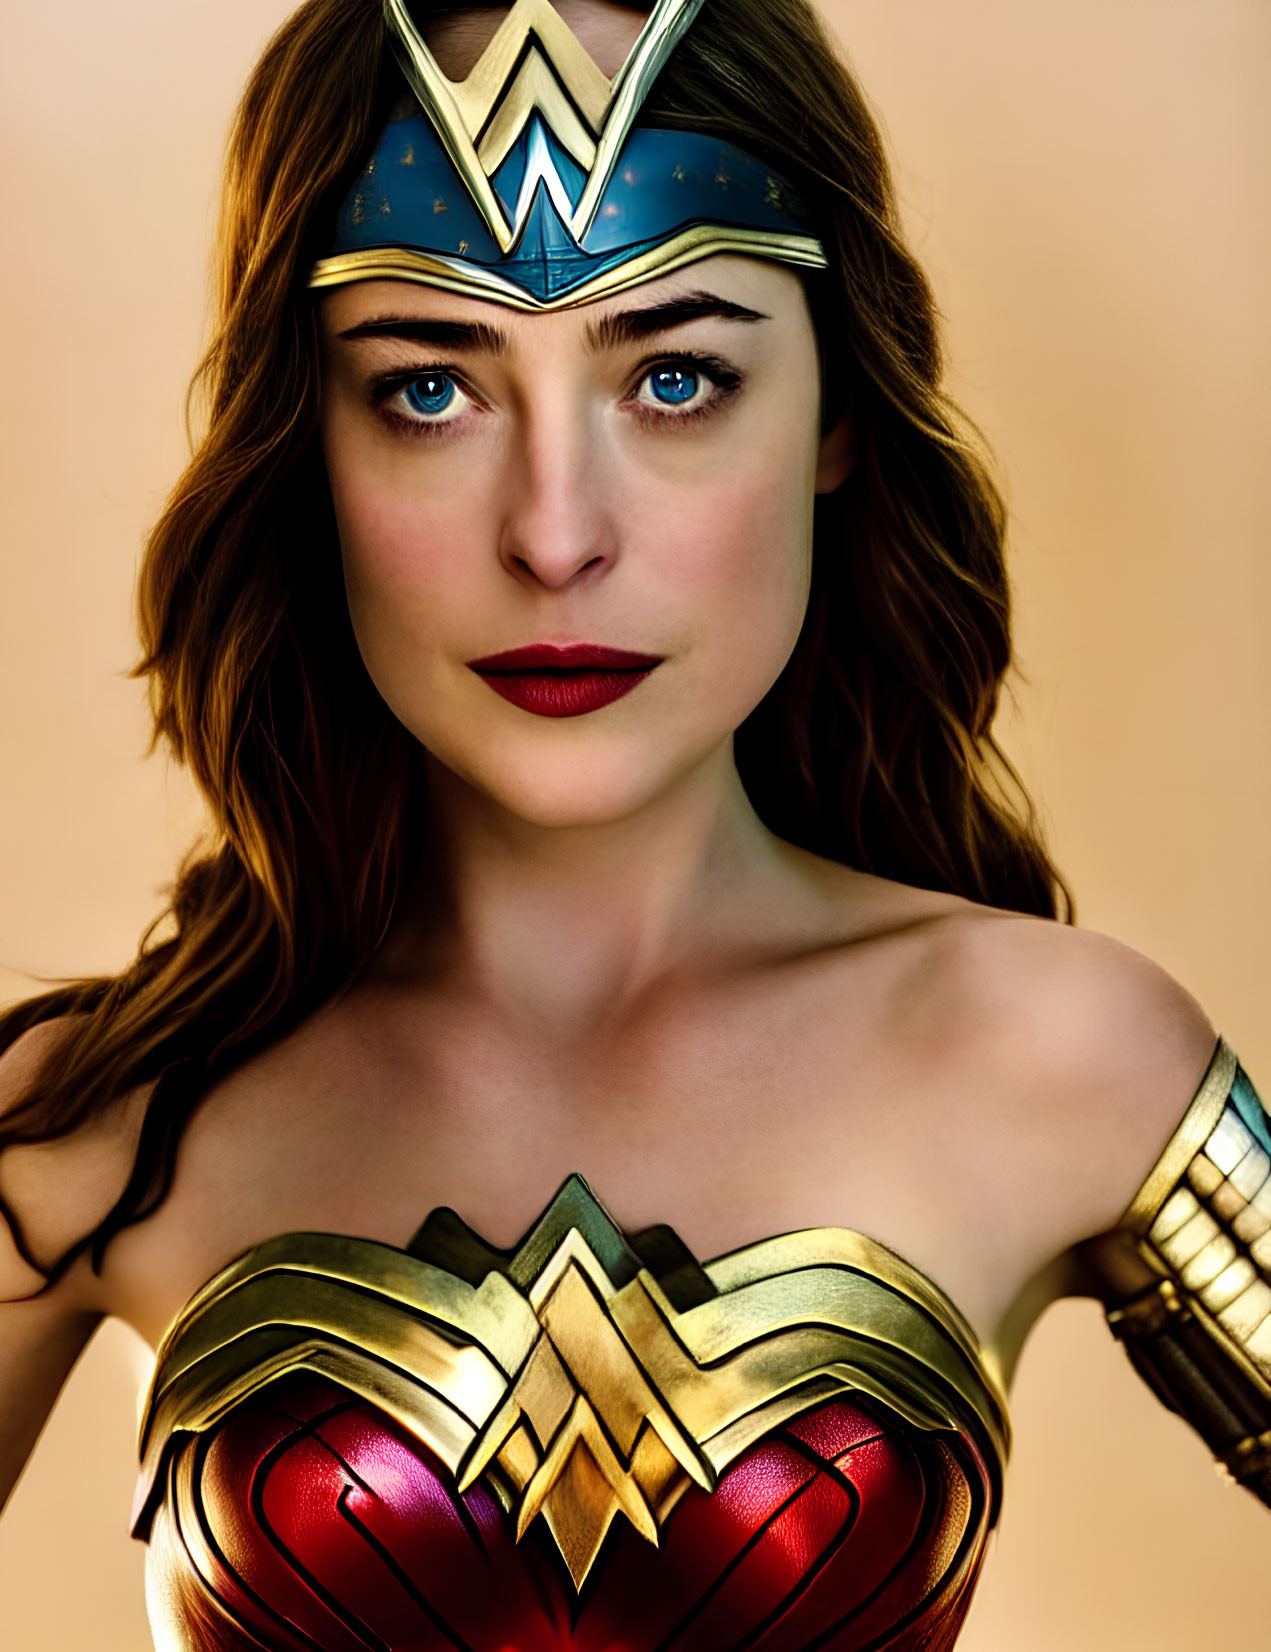 Woman in Wonder Woman Costume with Golden Tiara and Blue Eyes